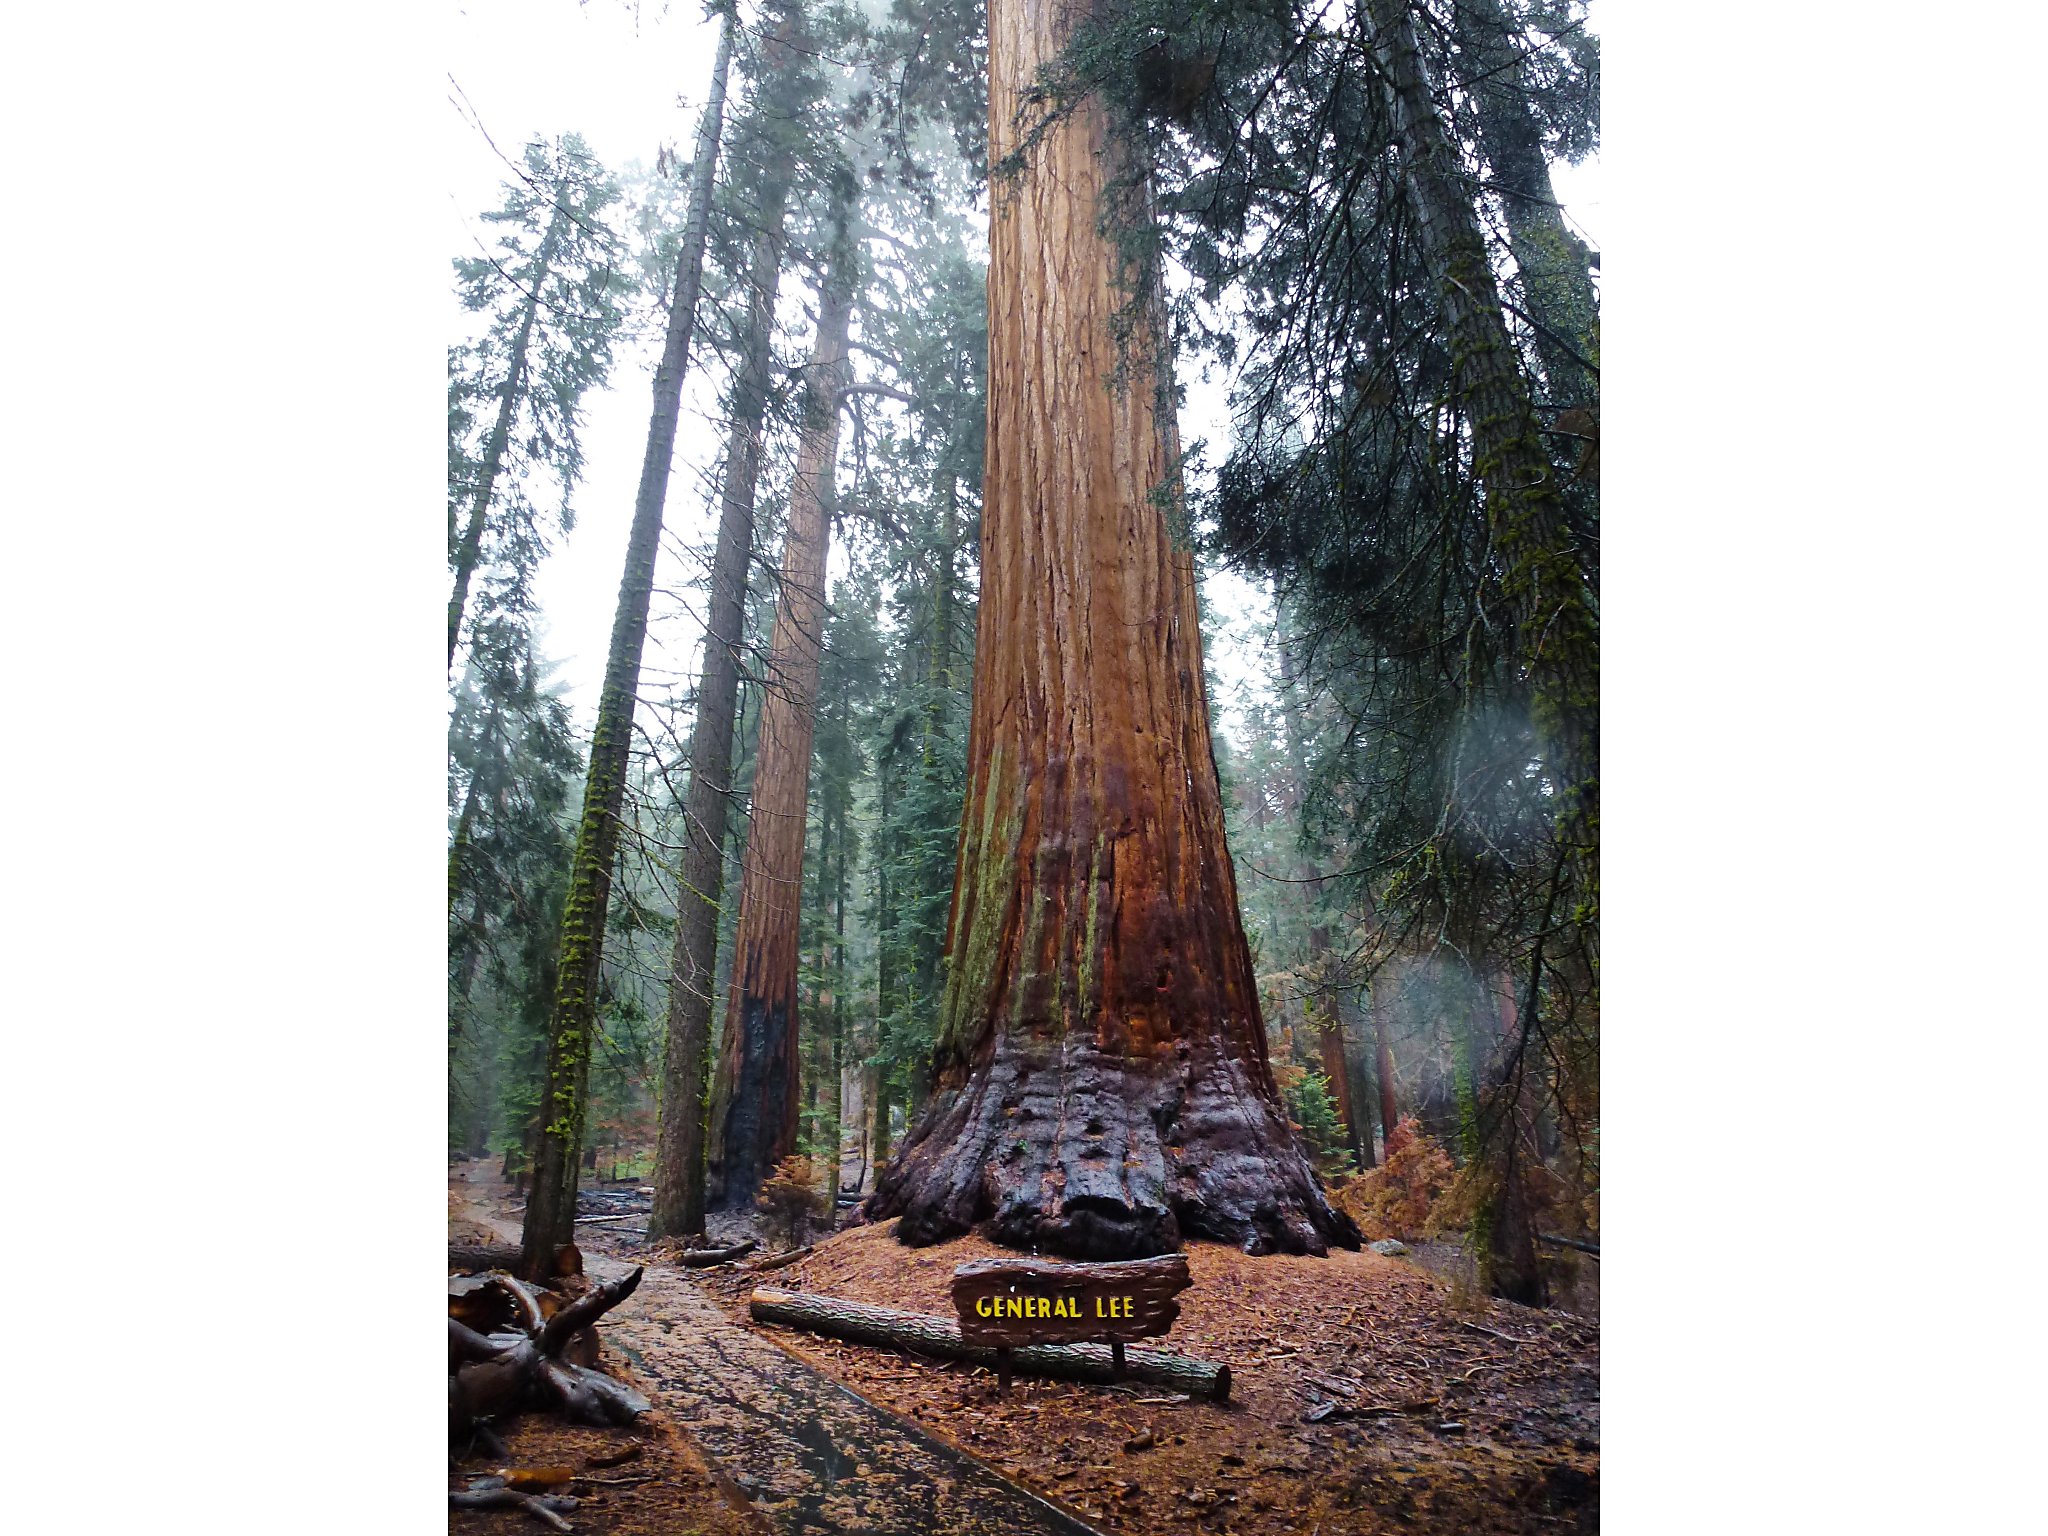 Jungle Rape Sex Hq - National Park Service removes Robert E. Lee's name from giant sequoia